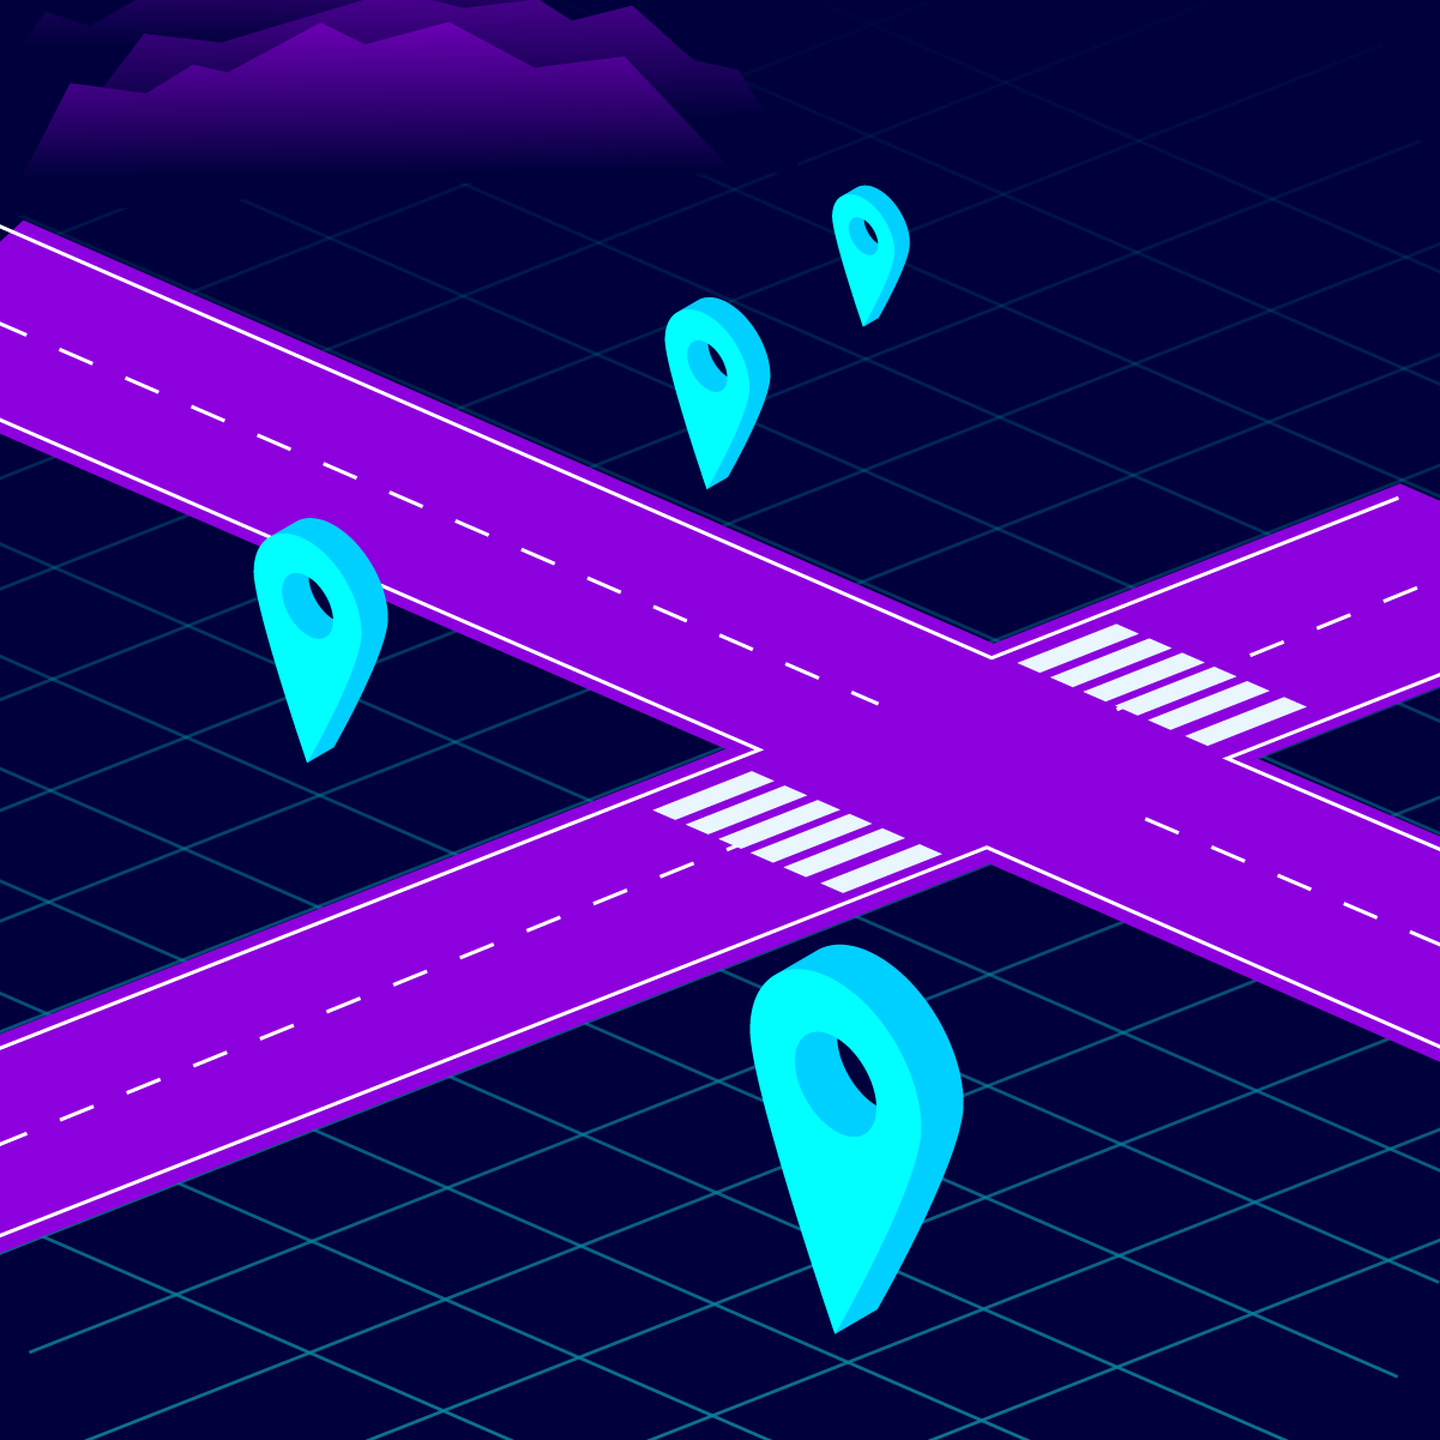 Graphic of a purple street with blue pin points